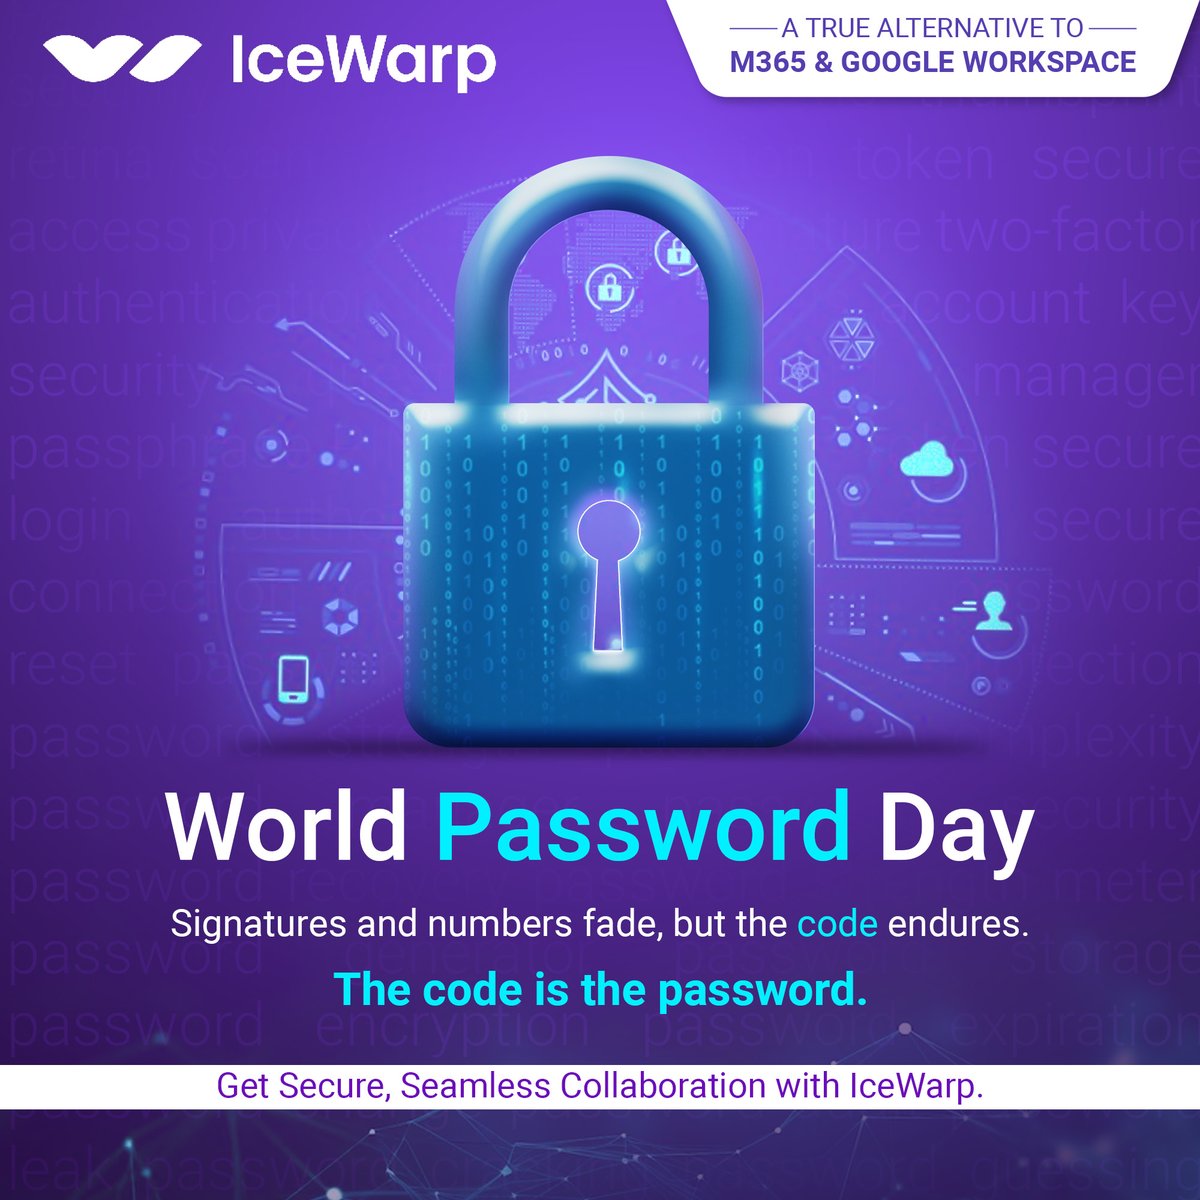 It's #WorldPasswordDay! Don't be a hacker's easy target. 
Take control of your online security by creating strong, unique passwords for all your accounts. 

#icewarpindia #icewarpemail #emailsecurity #cybersecurity #mobilesecurity #dataprotection #strongpasswords #digitalhygiene